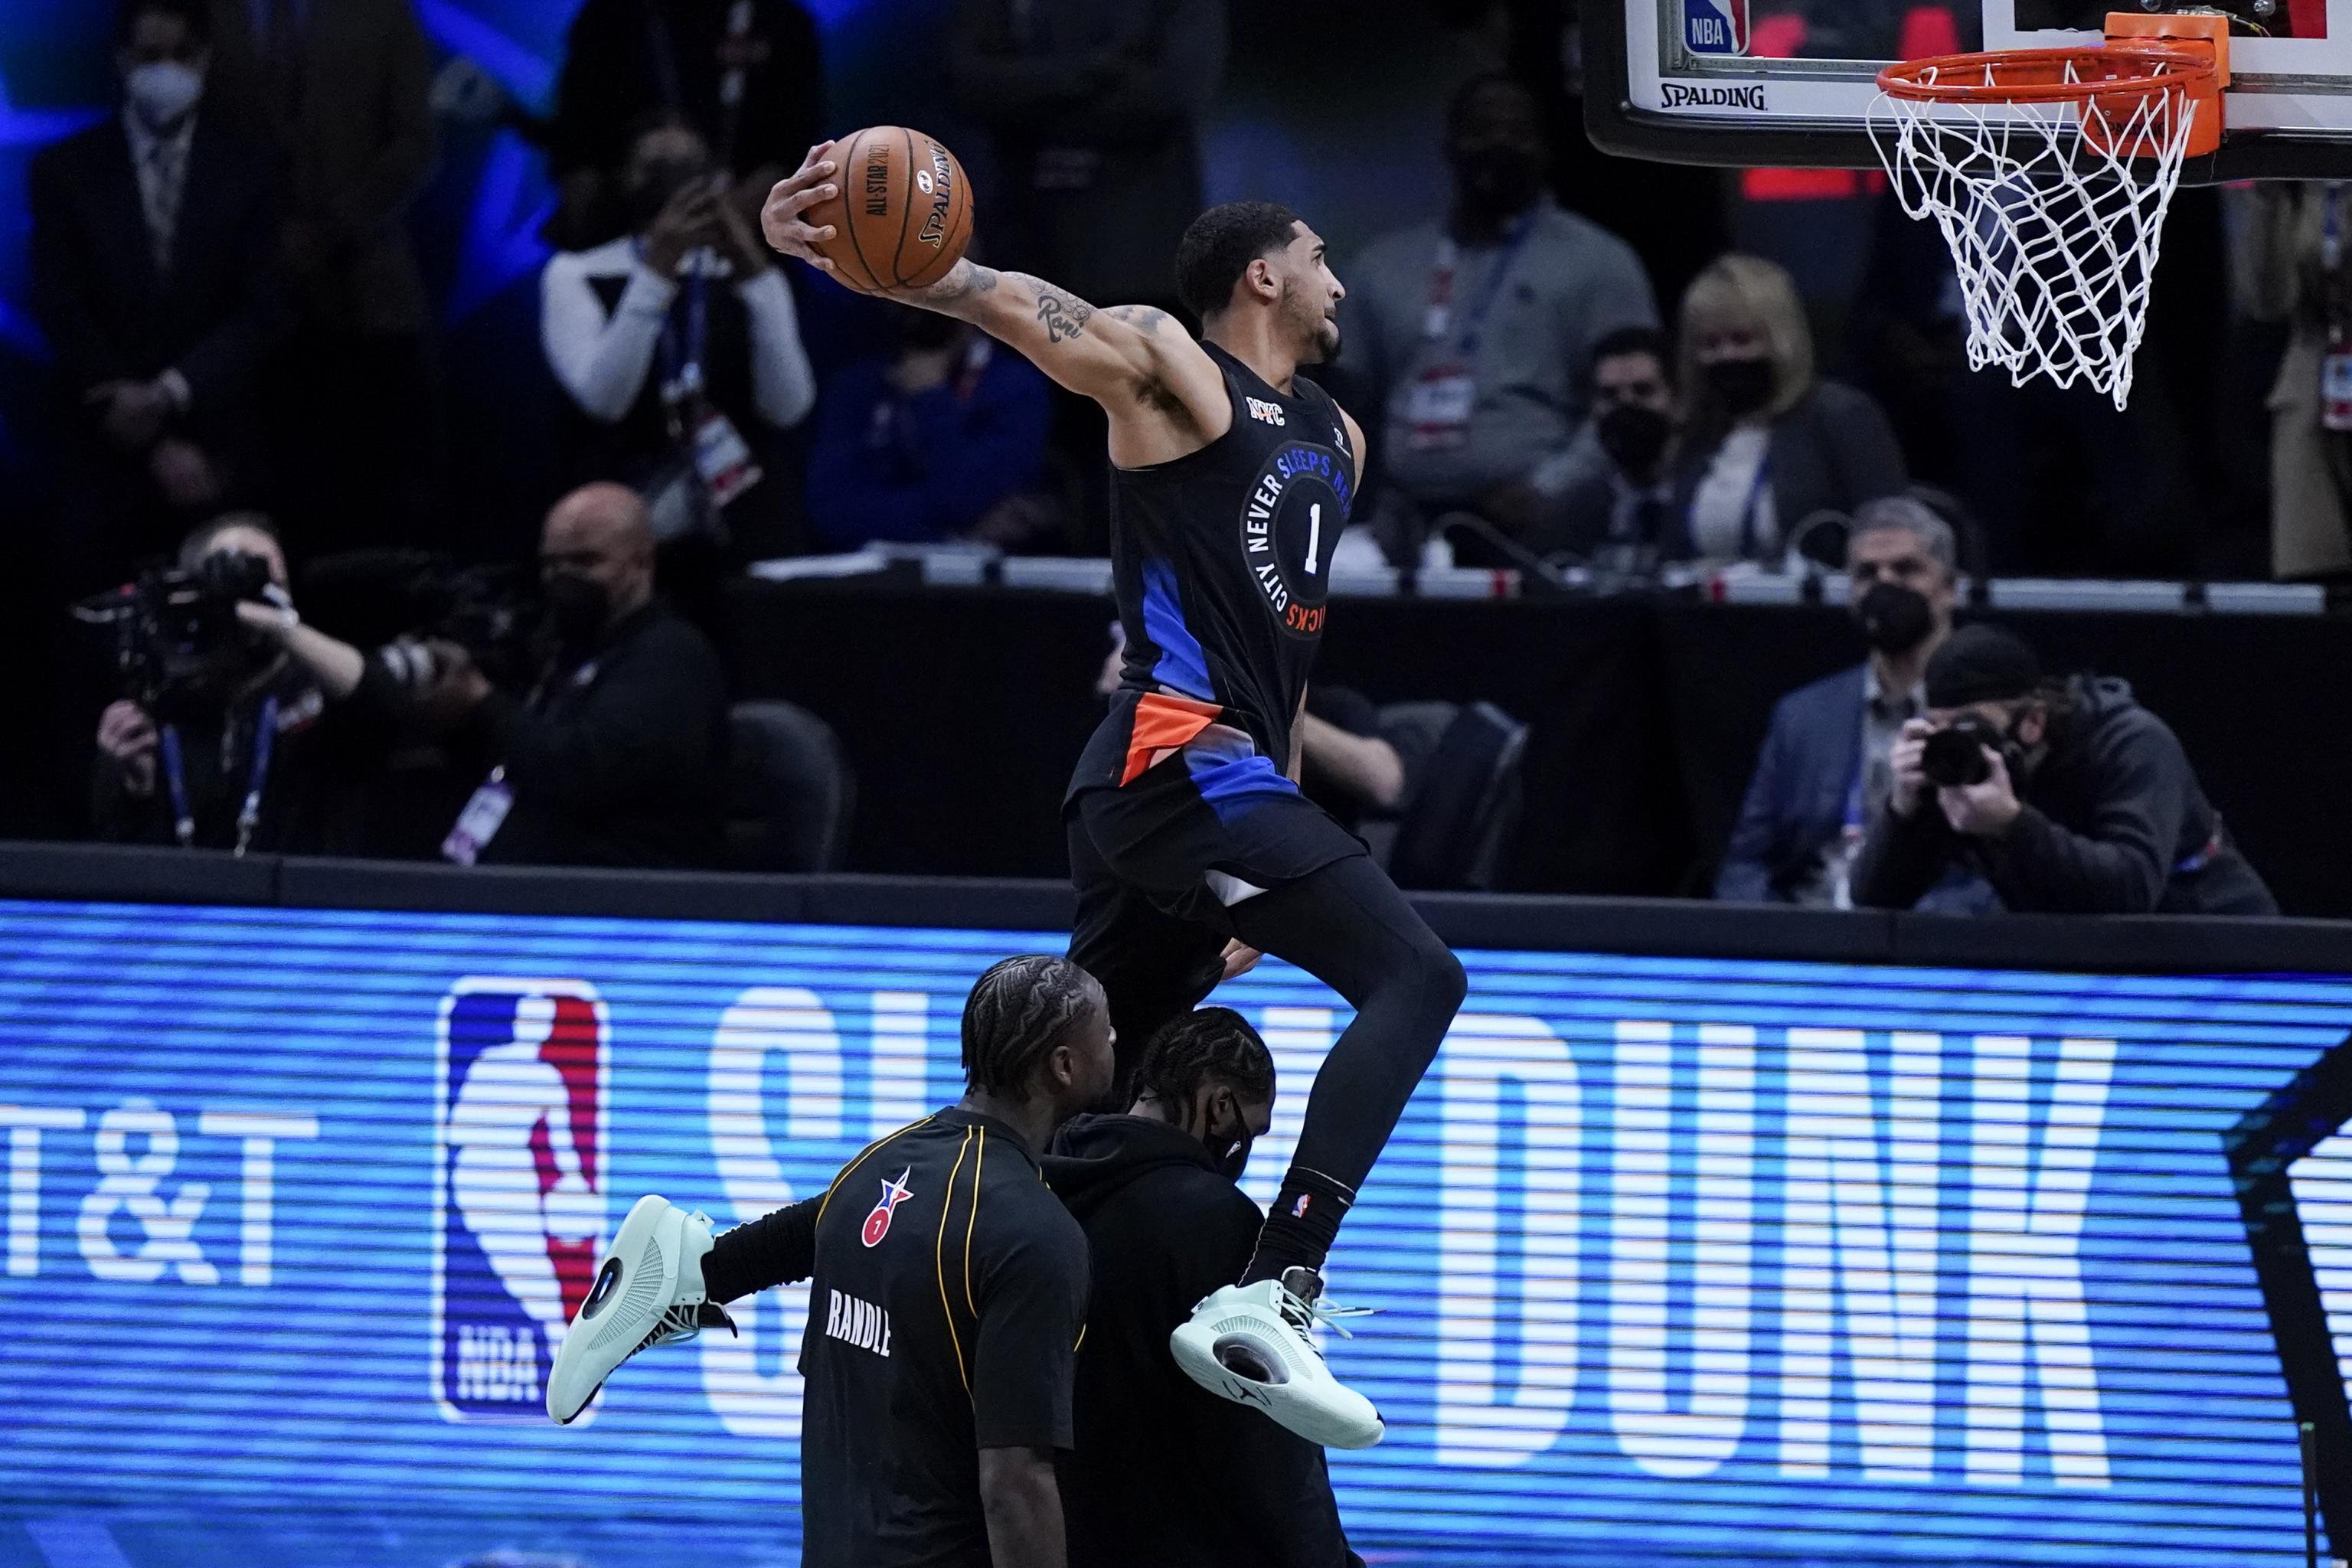 NBA Dunk Contest 2021: Anfernee Simons wins over Obi Toppin